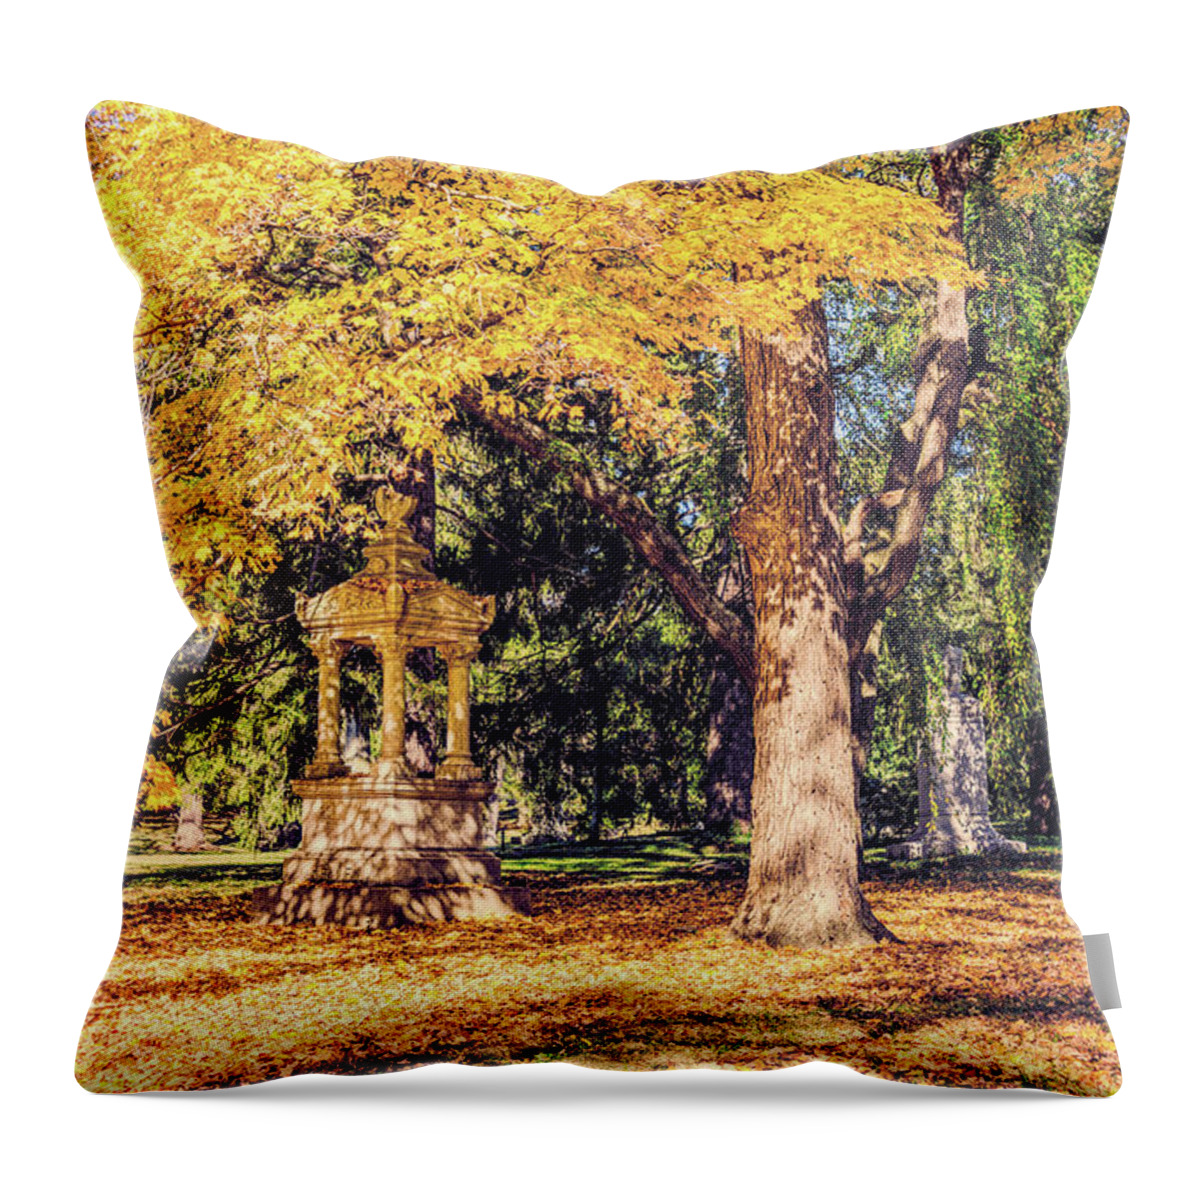 Autumn Throw Pillow featuring the photograph Autumn Lights by Cathy Donohoue